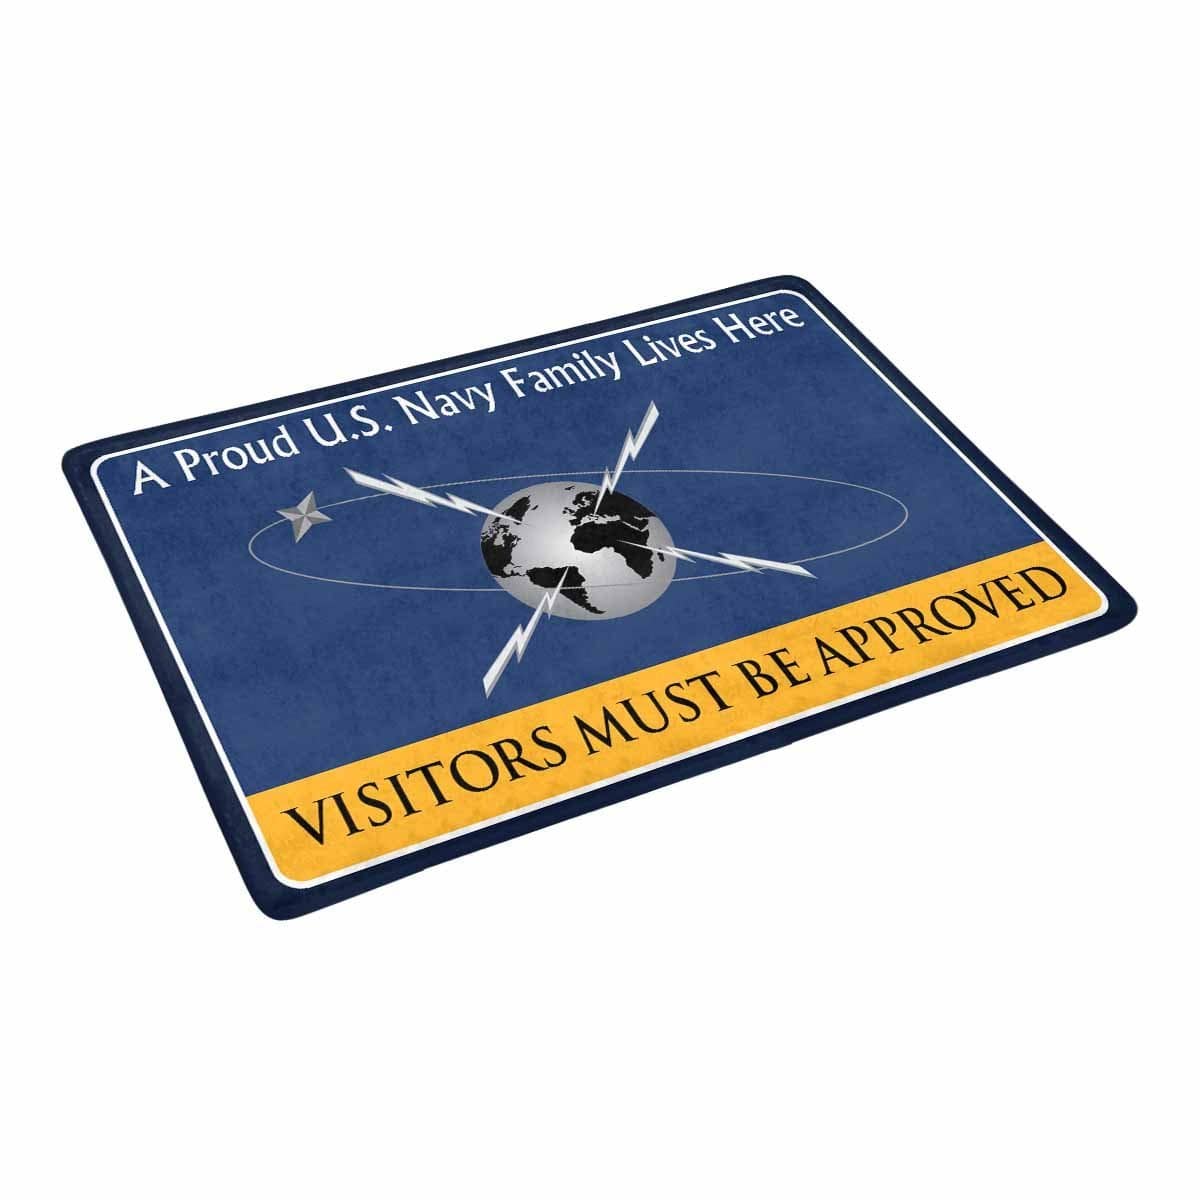 Navy Mass Communications Specialist Navy MC Family Doormat - Visitors must be approved (23,6 inches x 15,7 inches)-Doormat-Navy-Rate-Veterans Nation